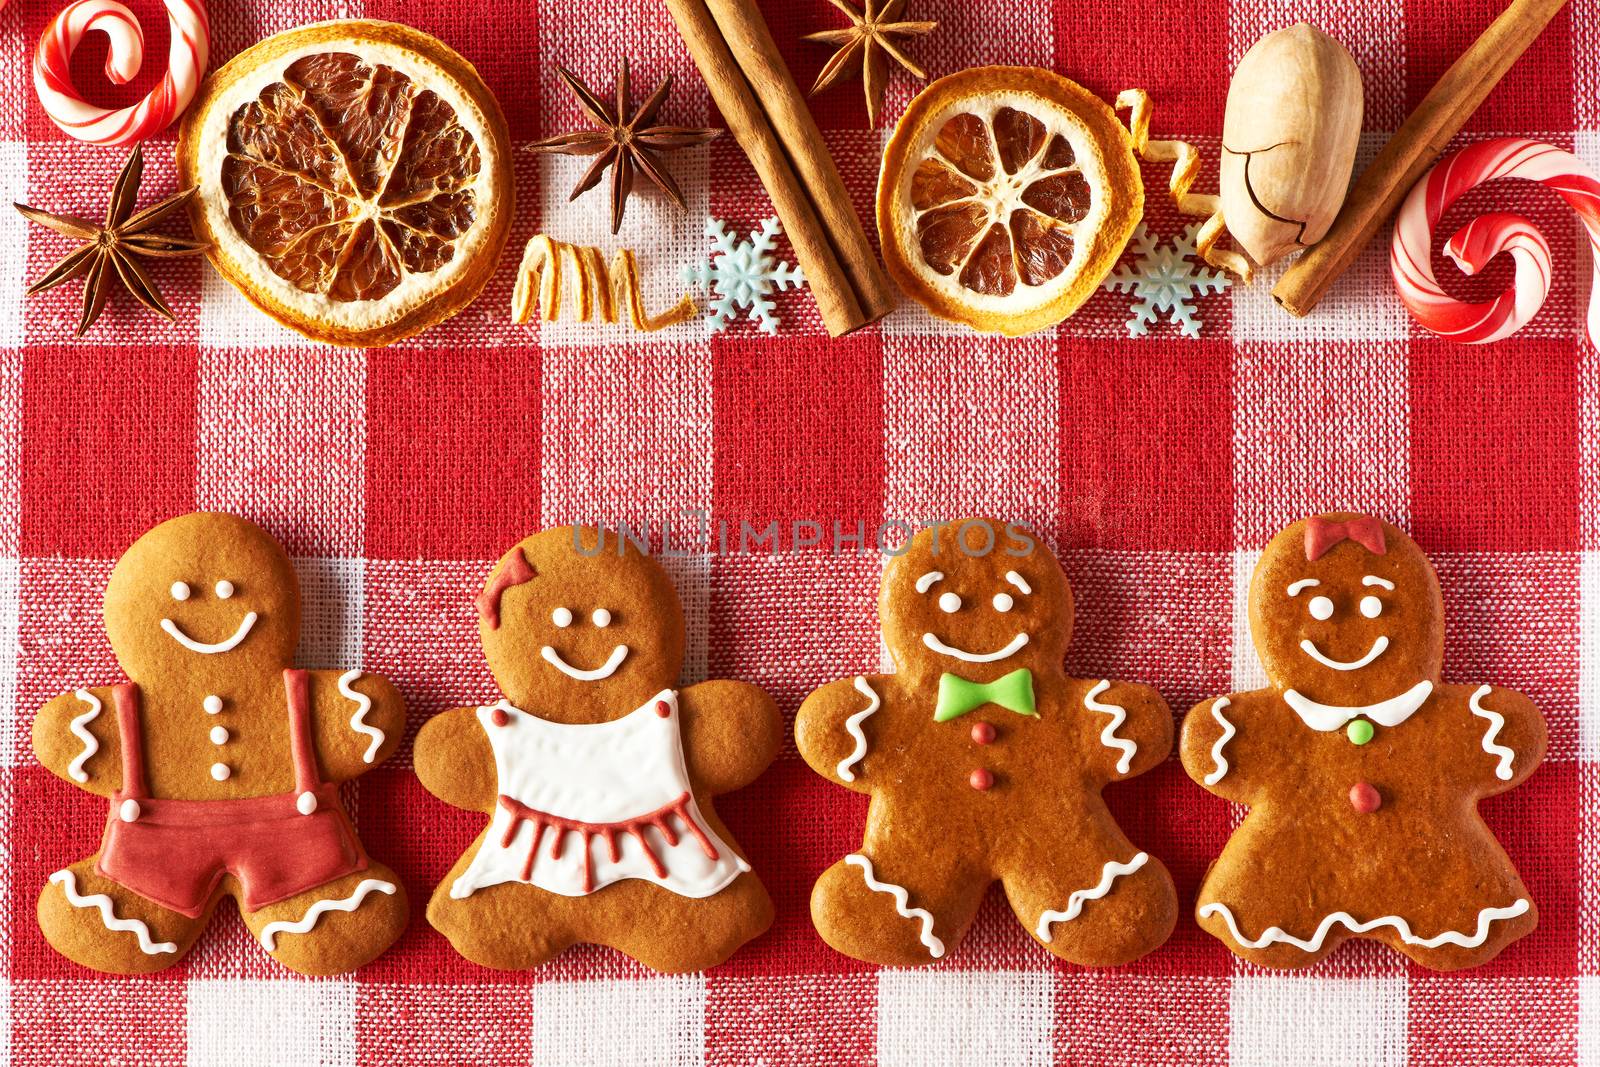 Christmas homemade gingerbread couples on tablecloth